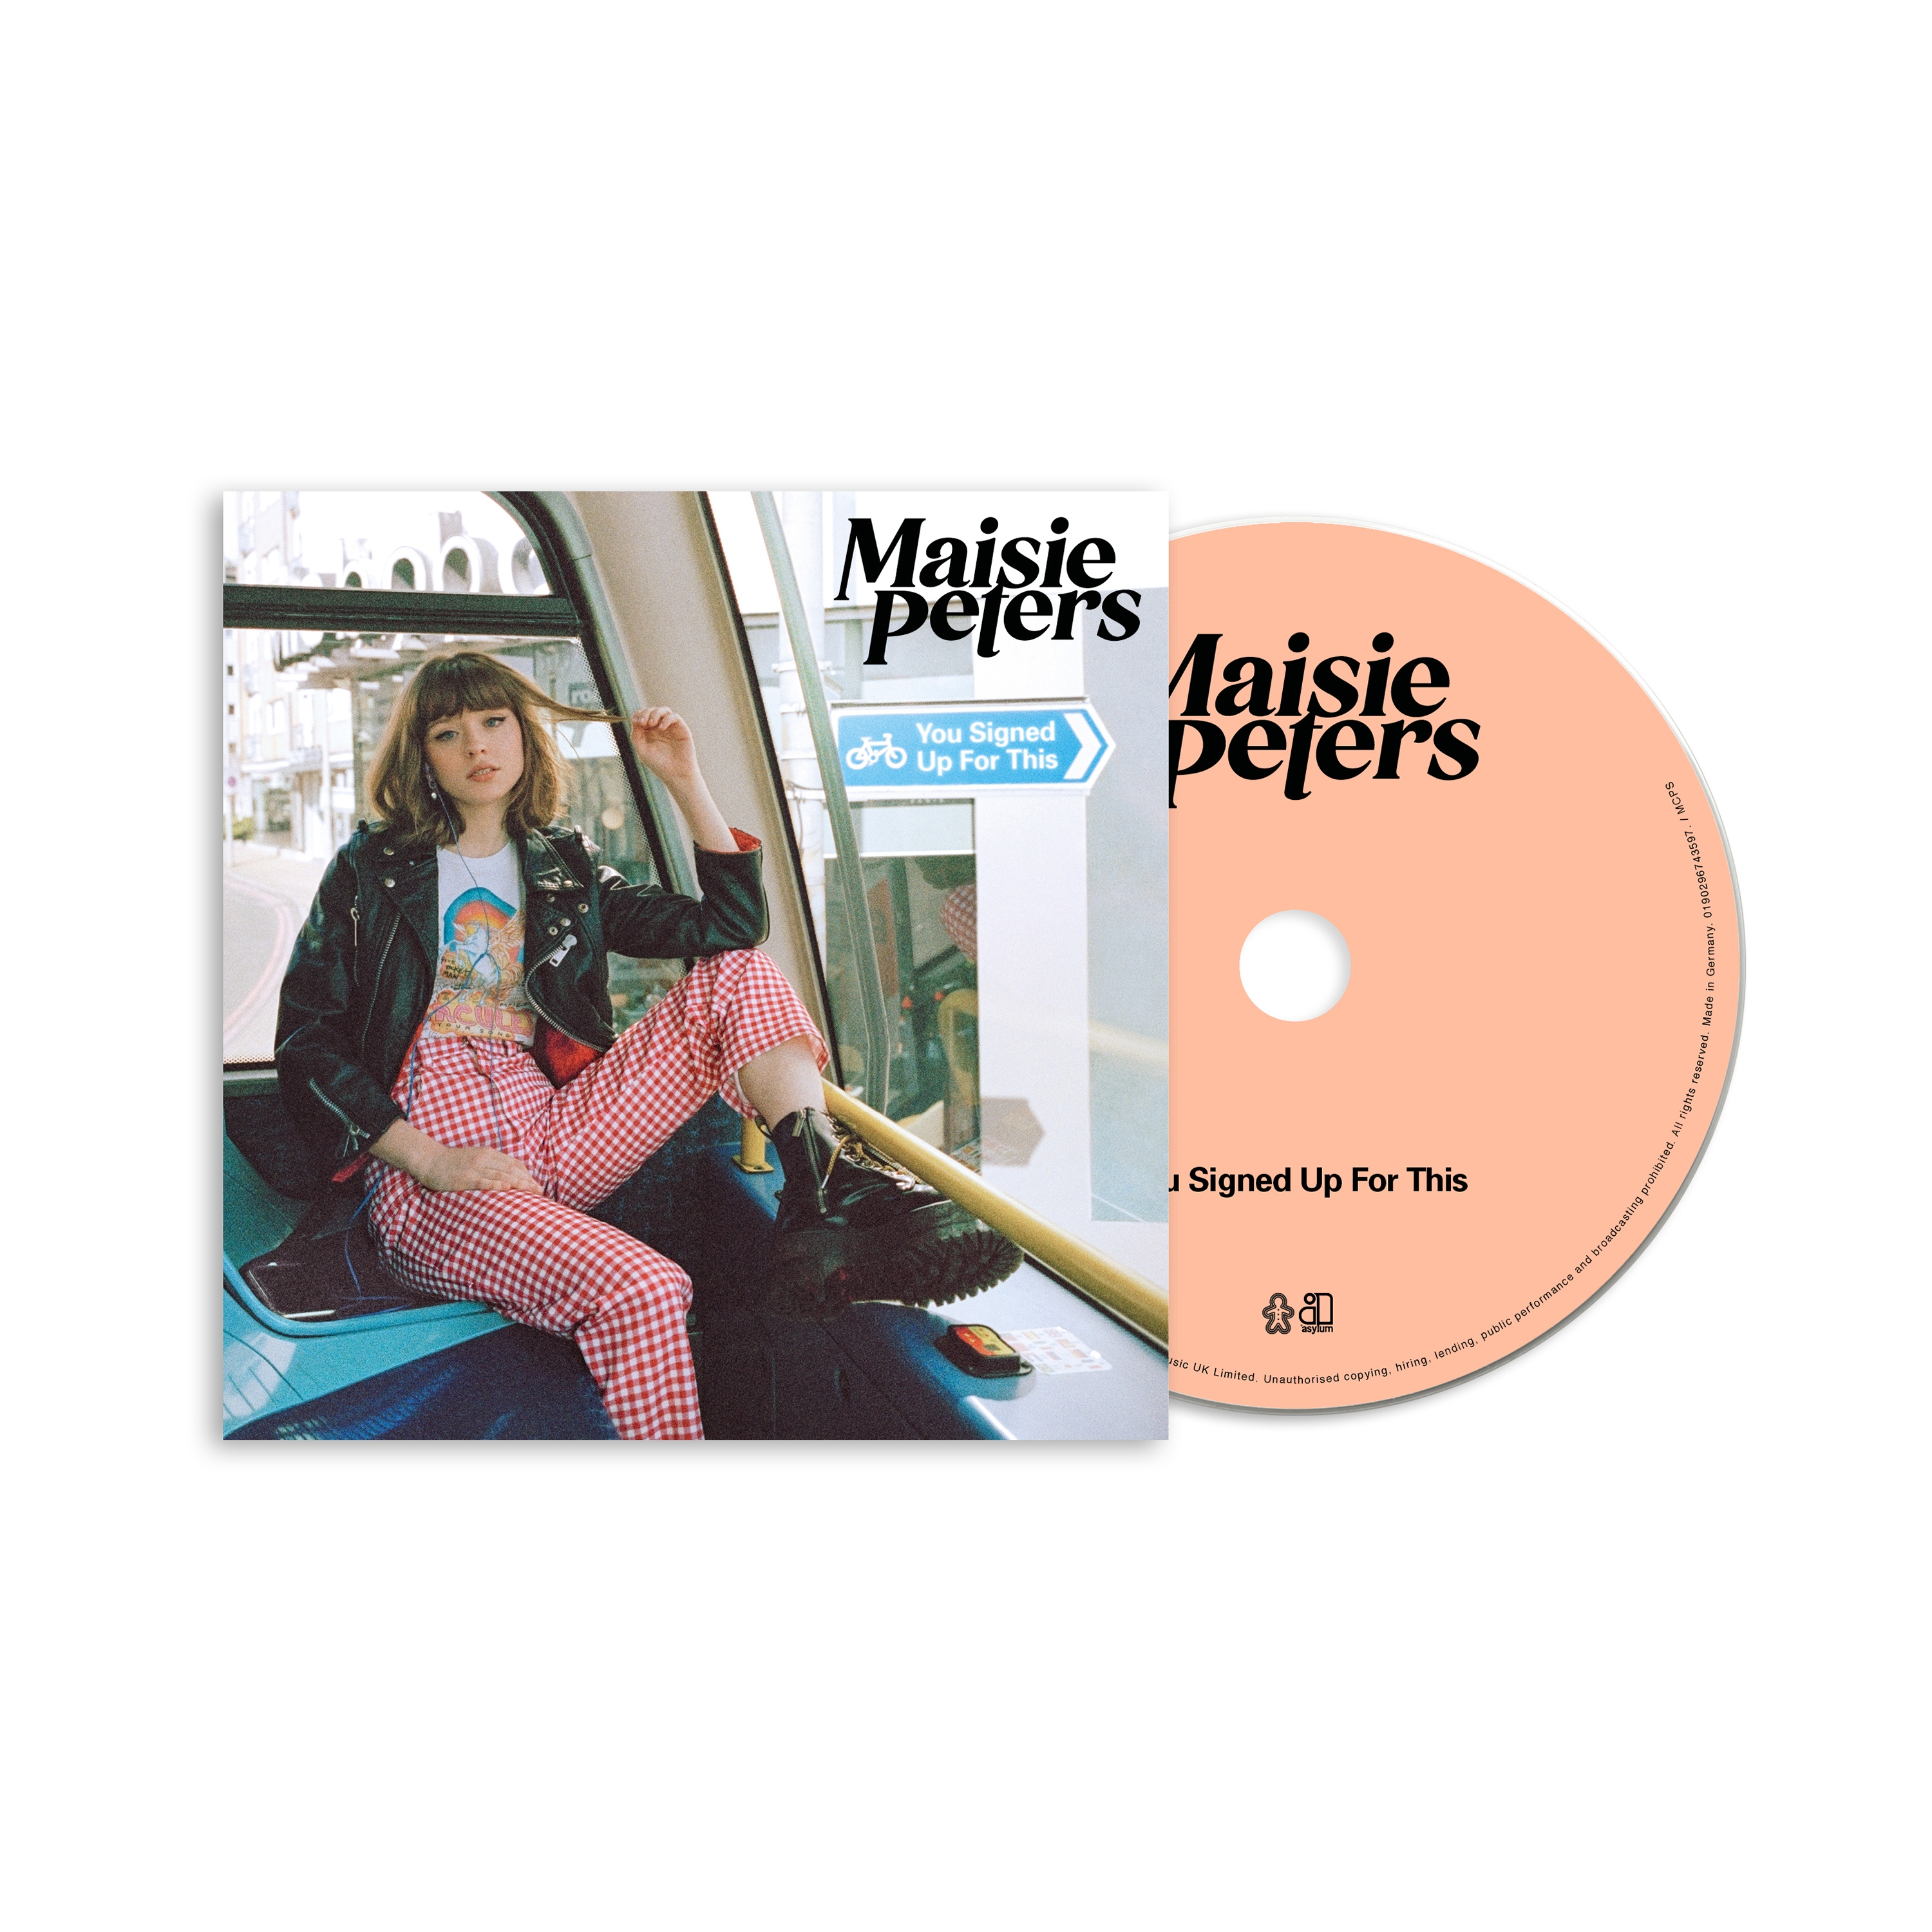 You Signed Up For This CD | Maisie Peters Official Store